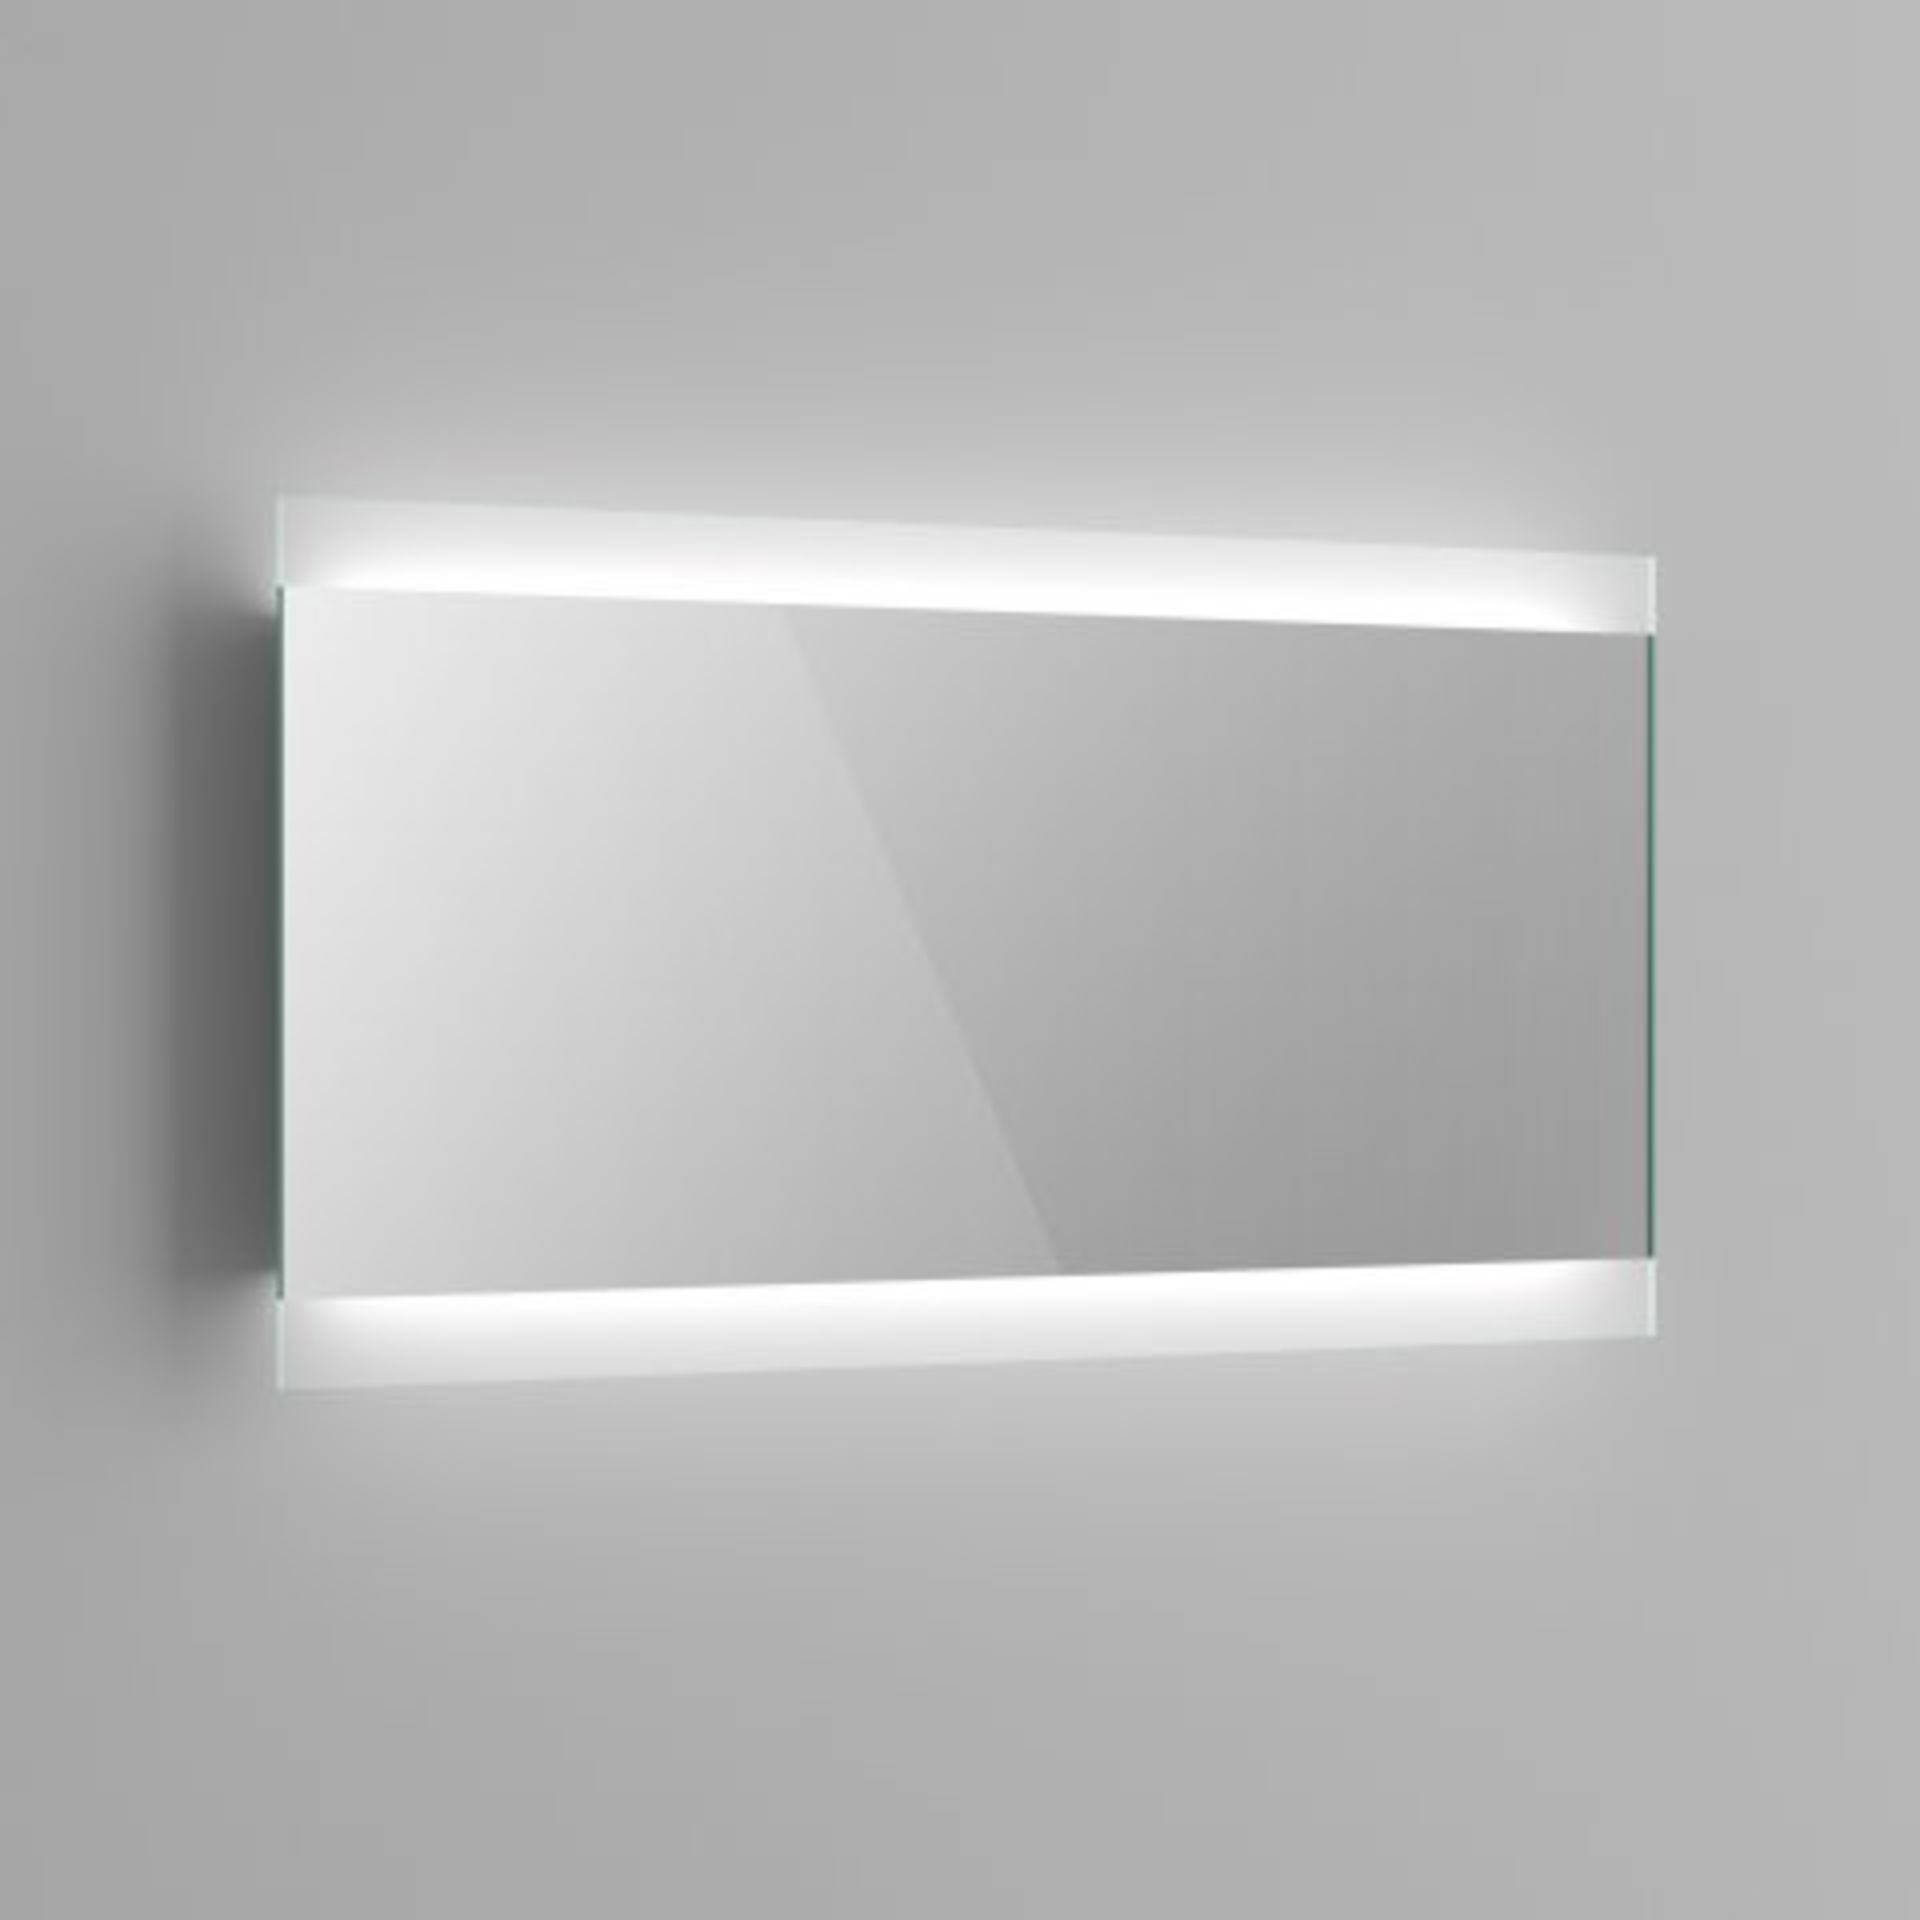 (M86) 400x800mm Aurora Illuminated LED Mirror. RRP £399.99. Sporting a streamlined appearance with - Image 3 of 4